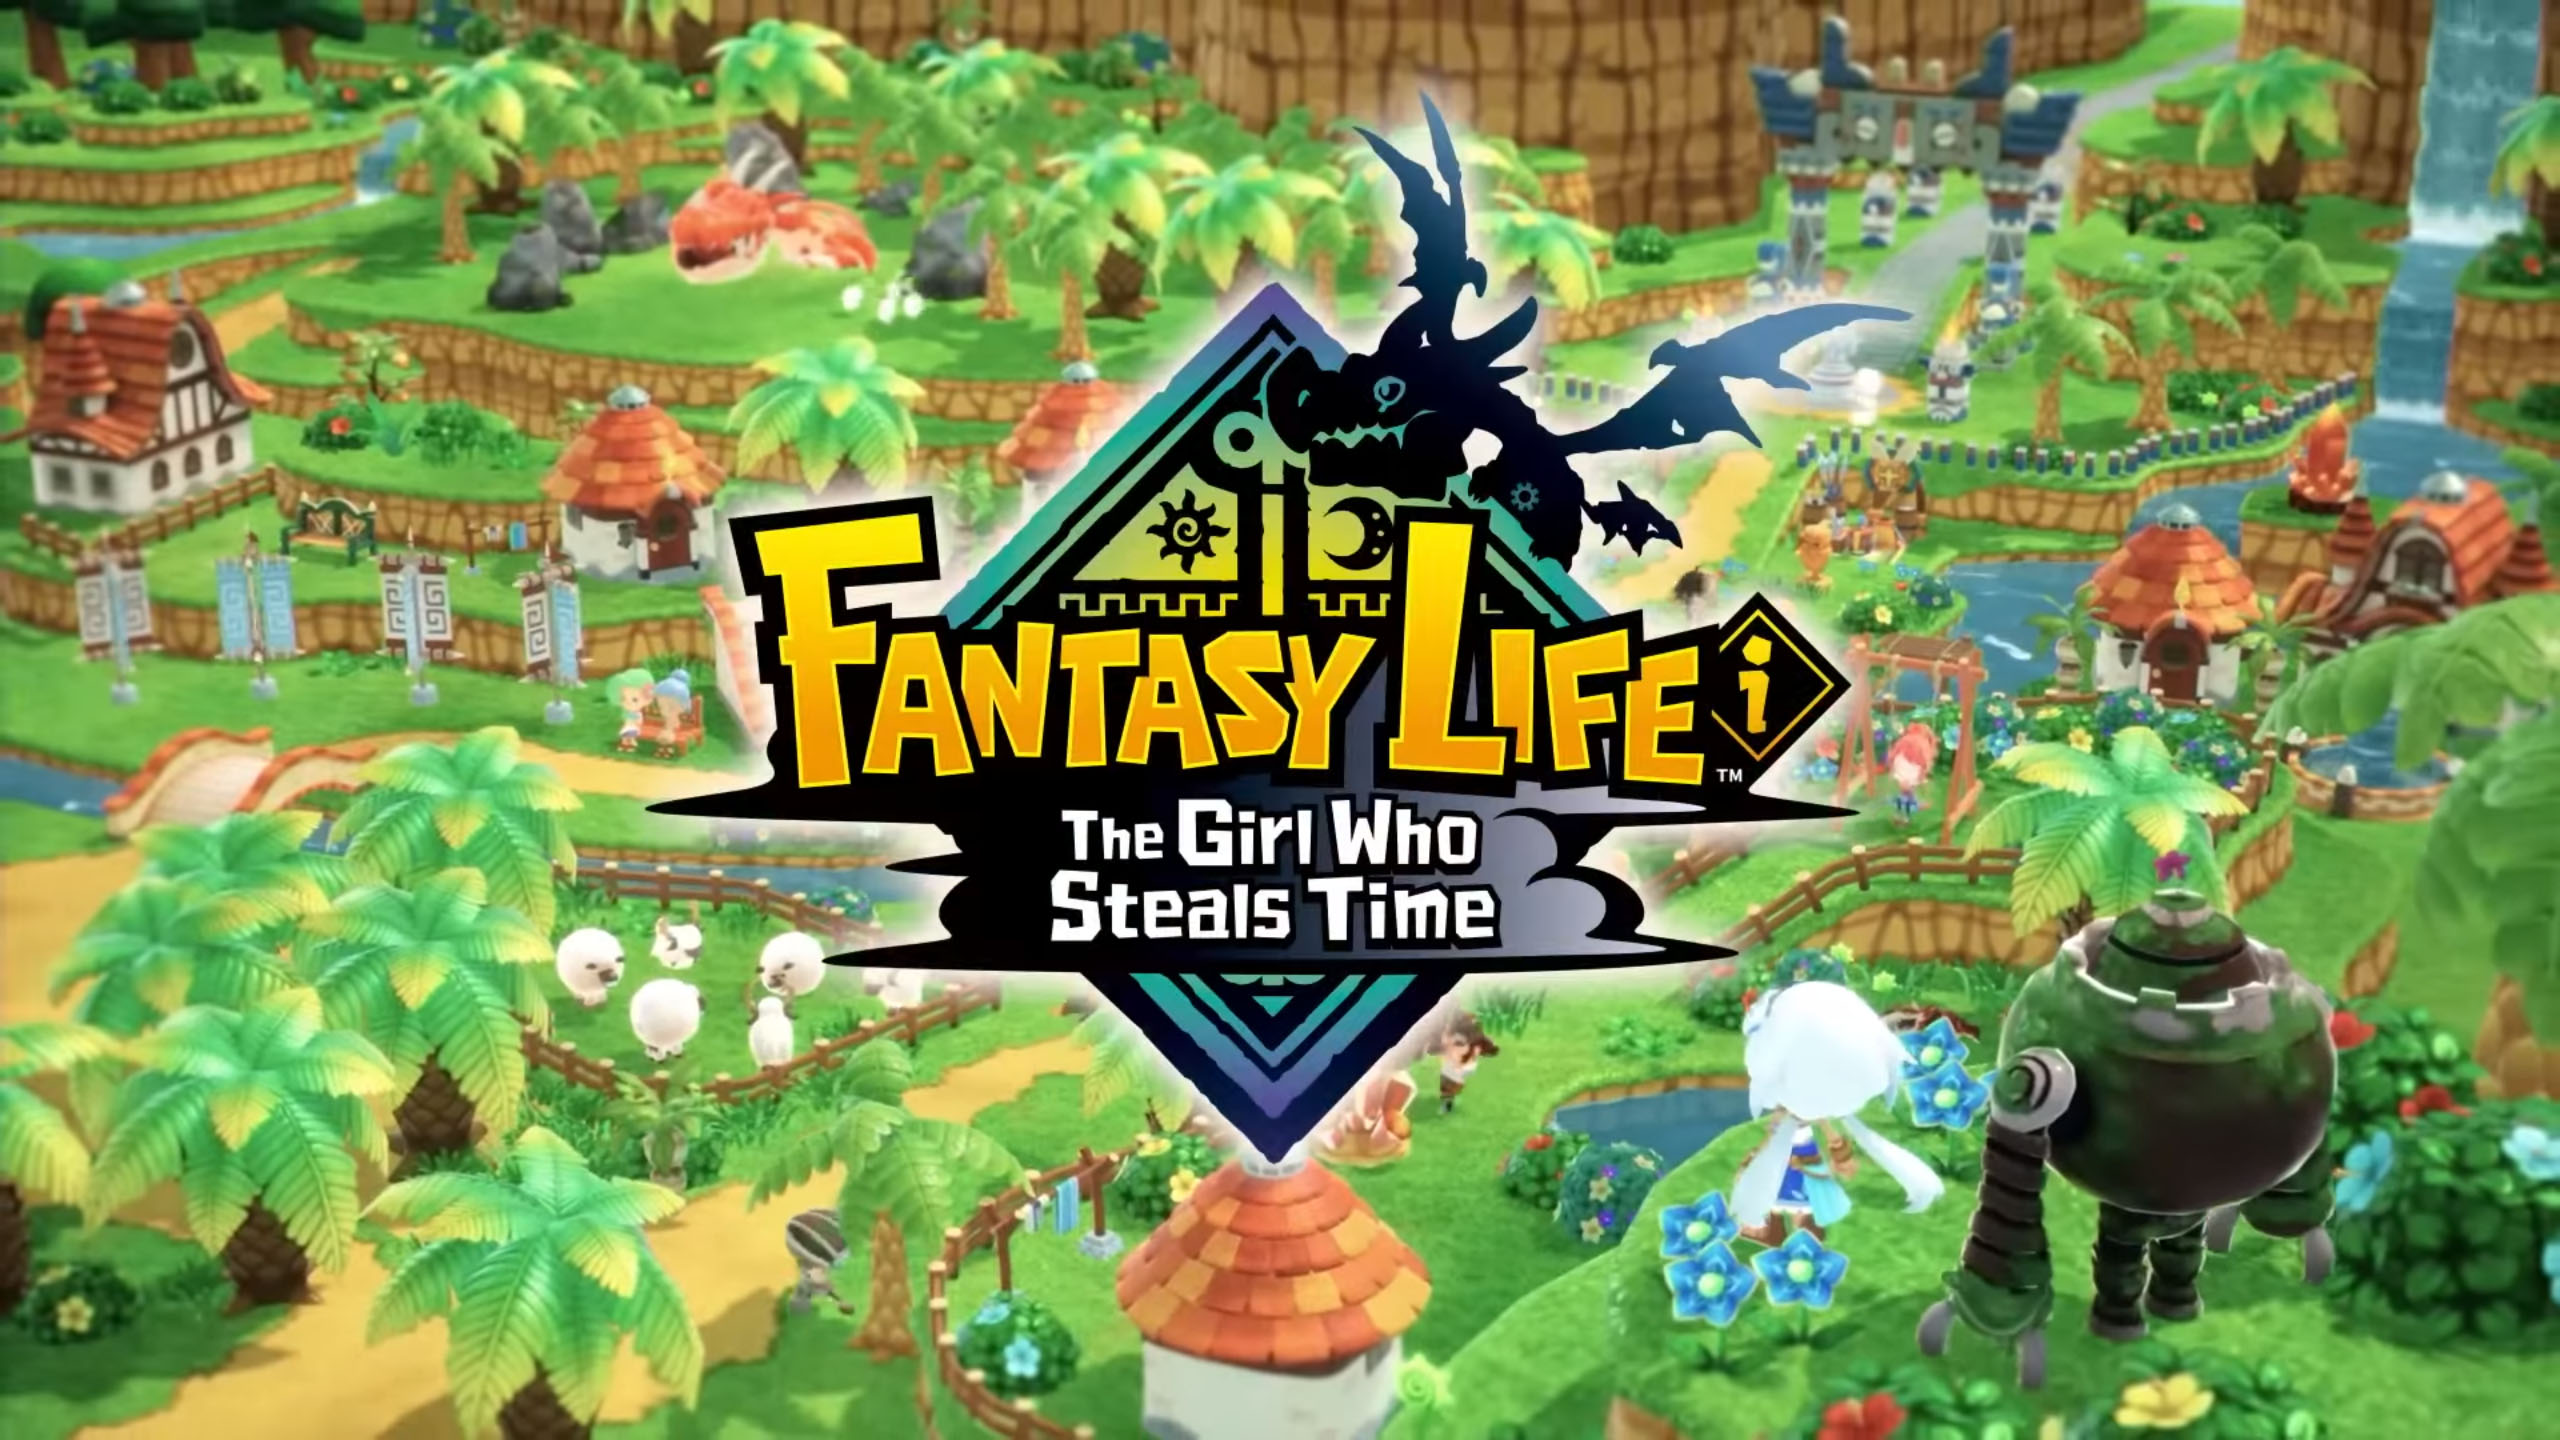 Fantasy Life i: The Girl Who Steals Time announced